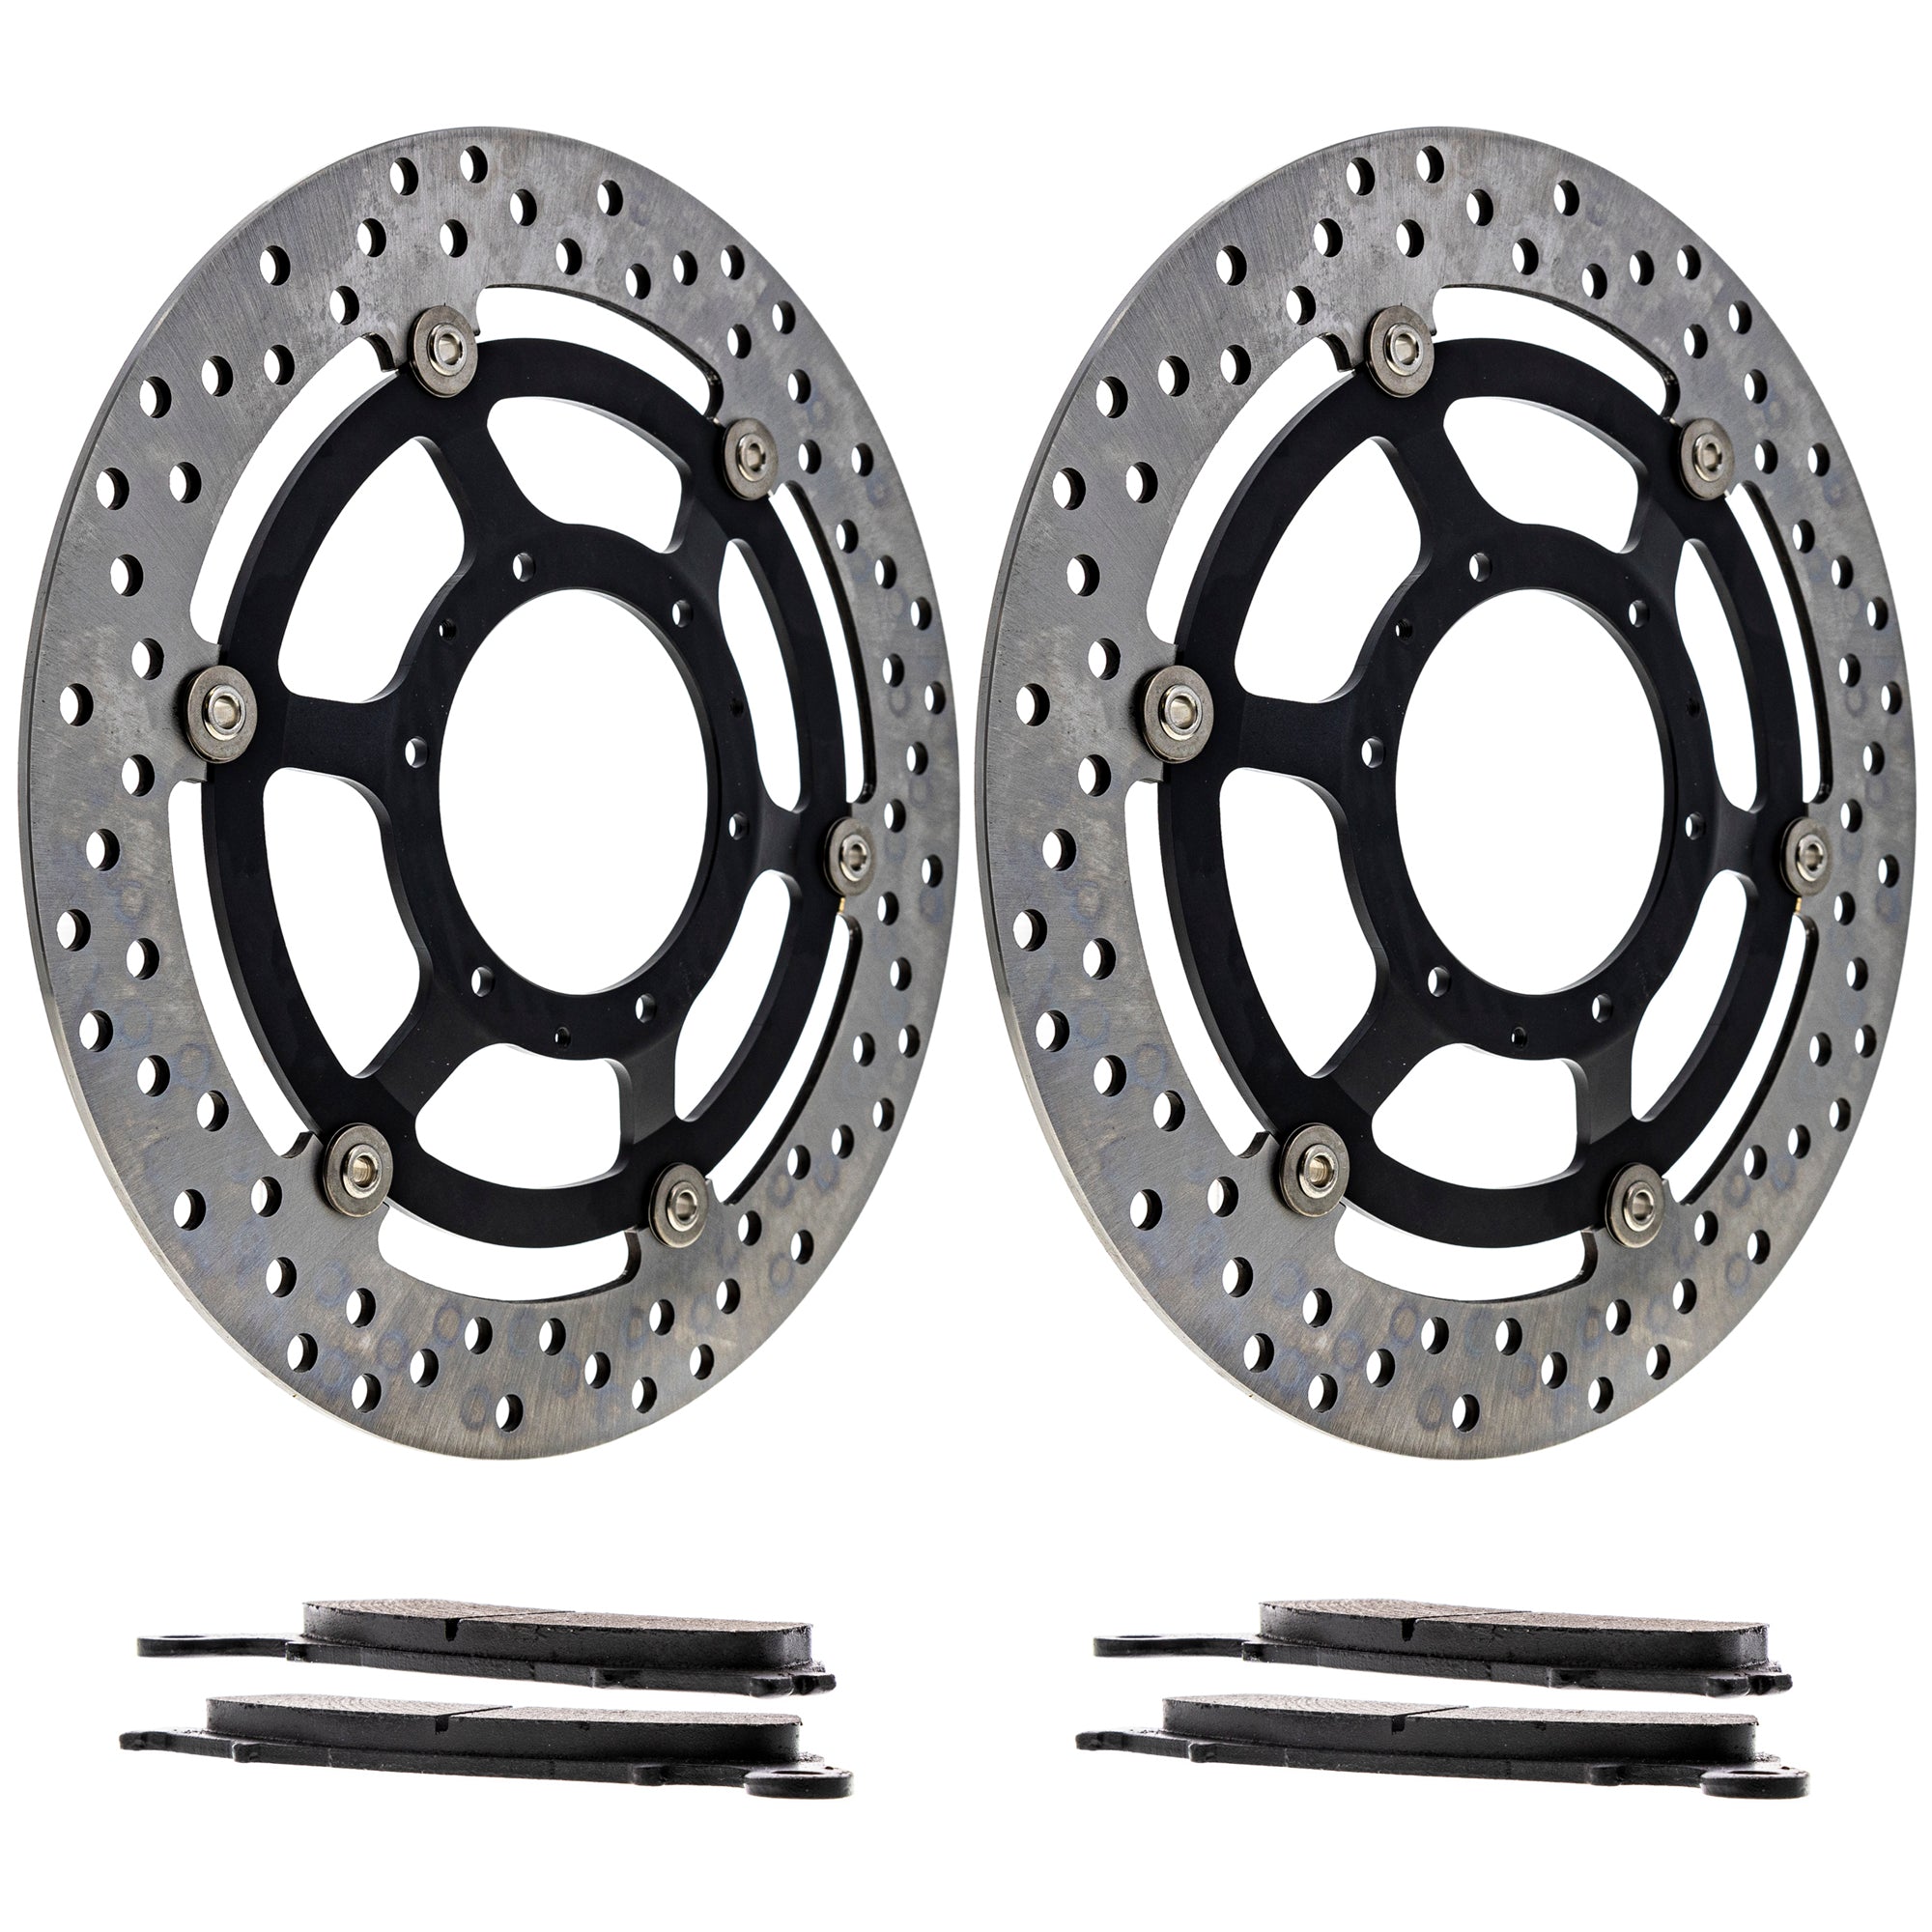 Front Brake Rotors and Pads Kit for zOTHER Victory Triumph KTM BMW CB1000R 06455-MCS-R02 NICHE MK1006550